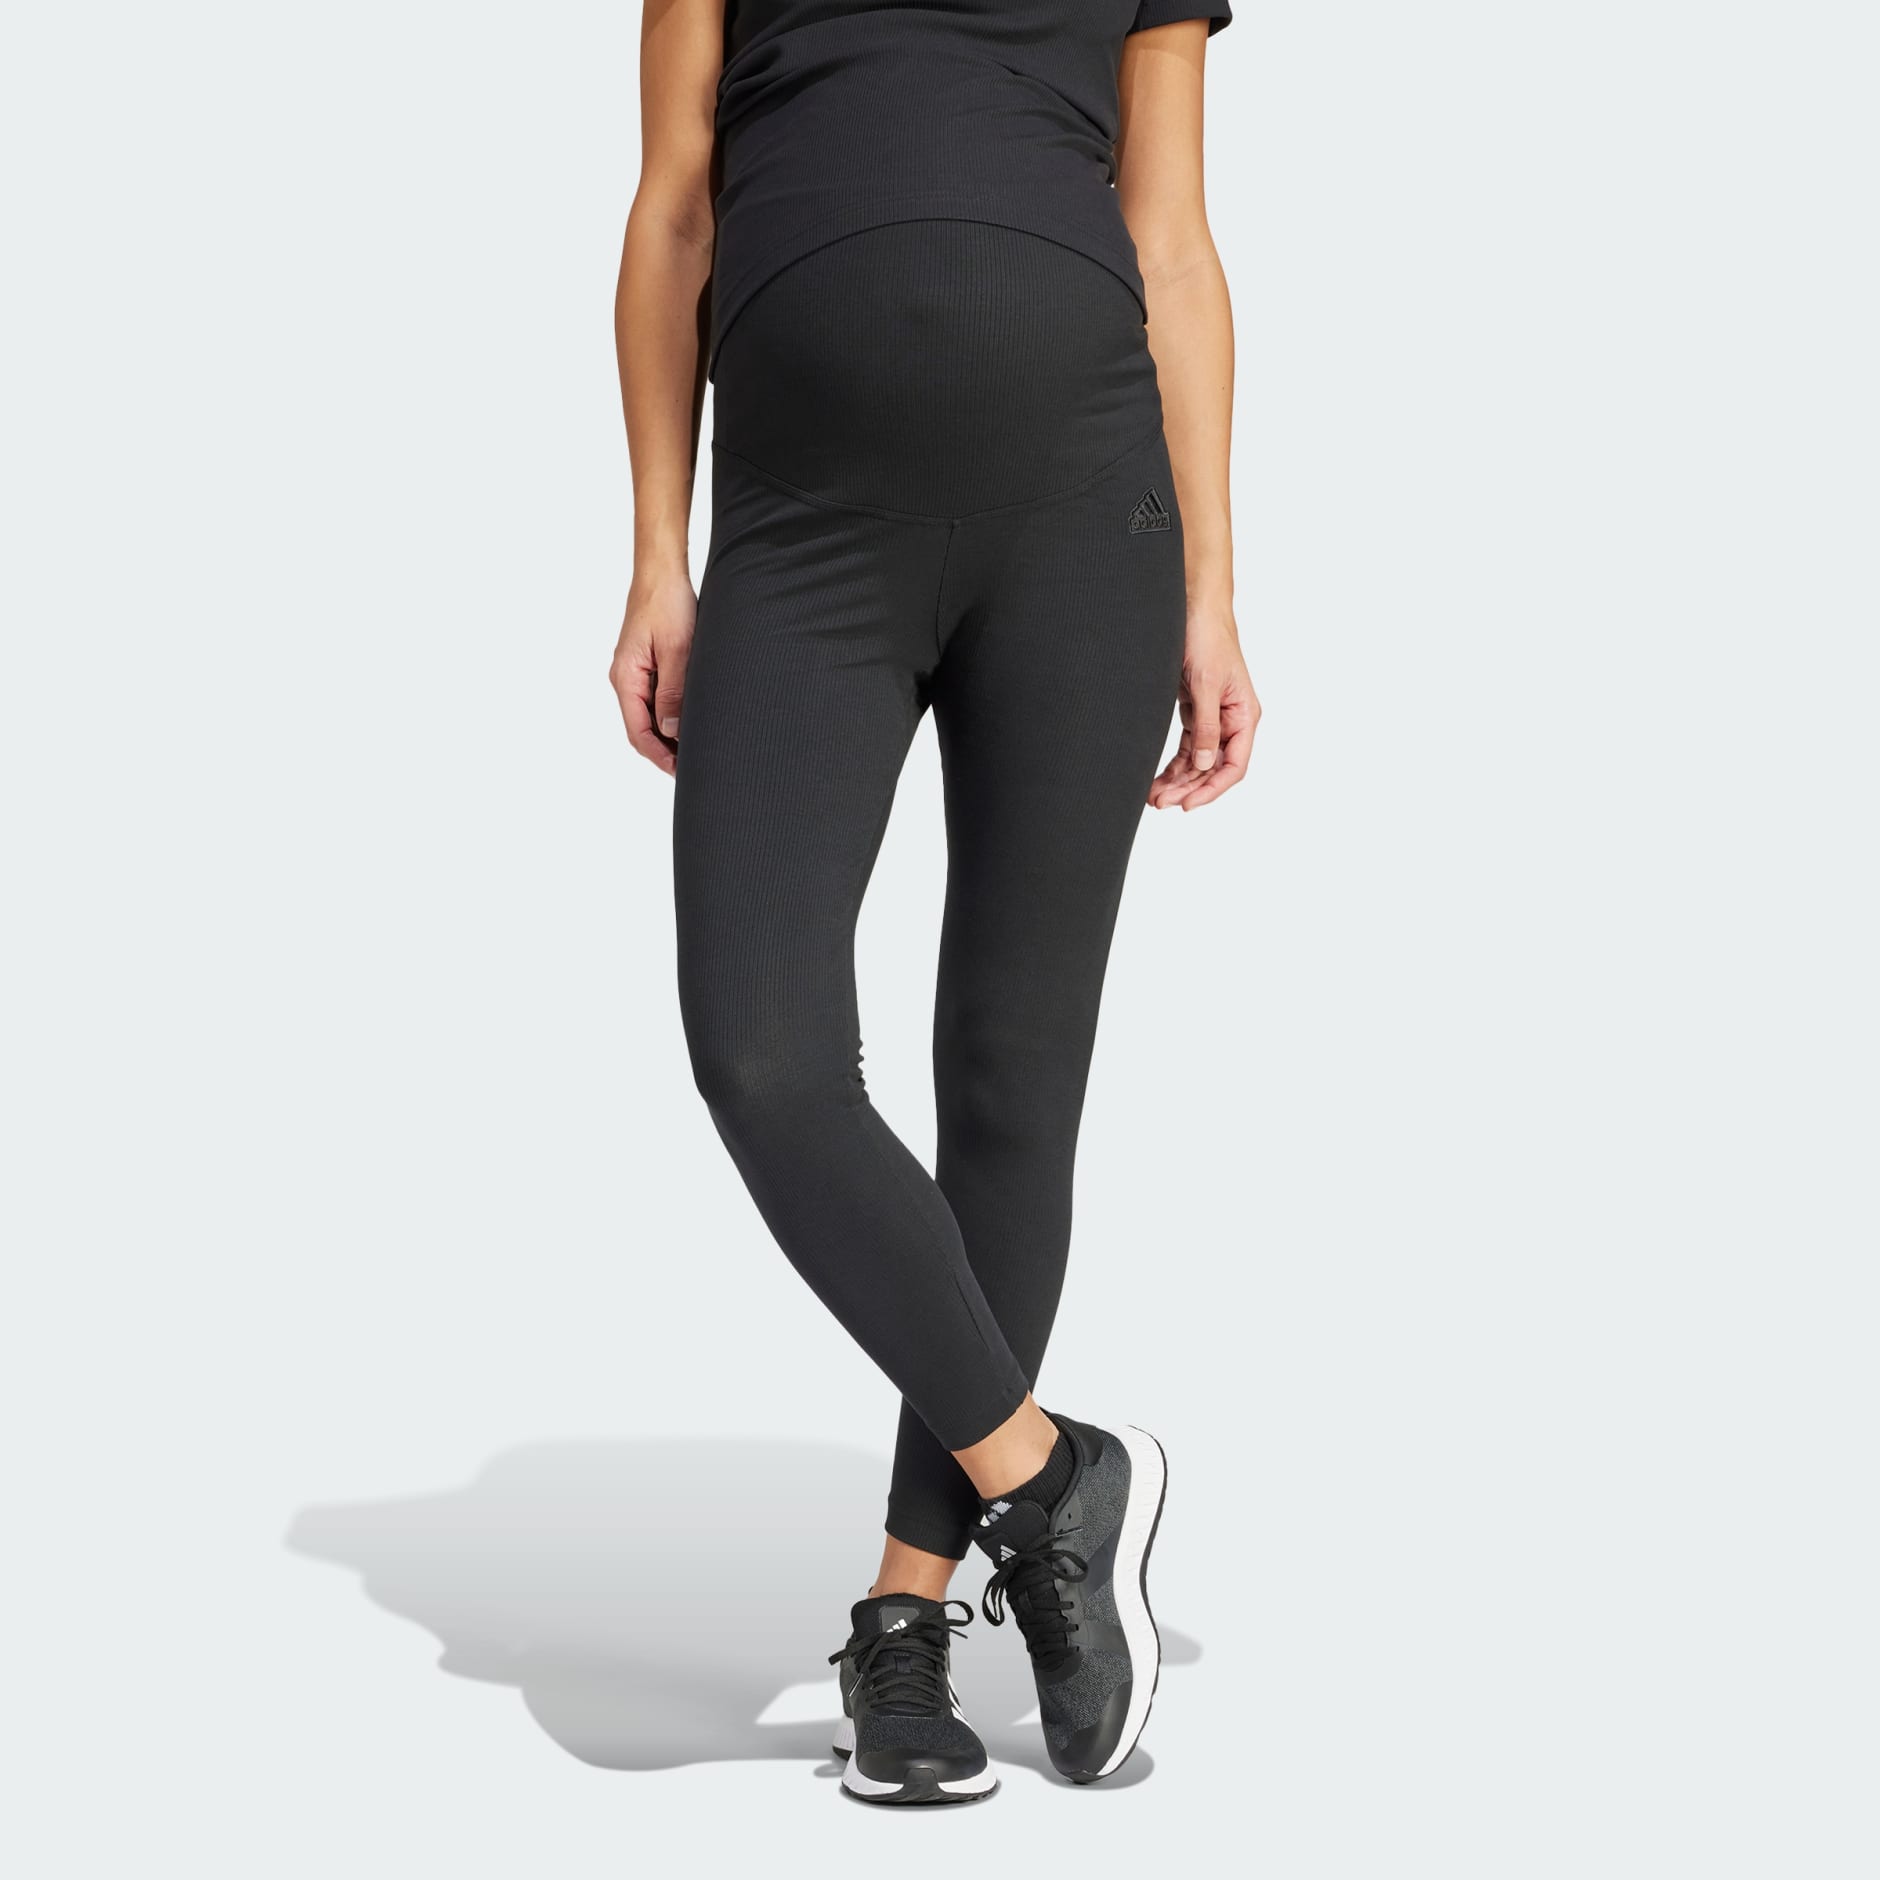 Womens High Waisted Maternity Tights & Leggings.